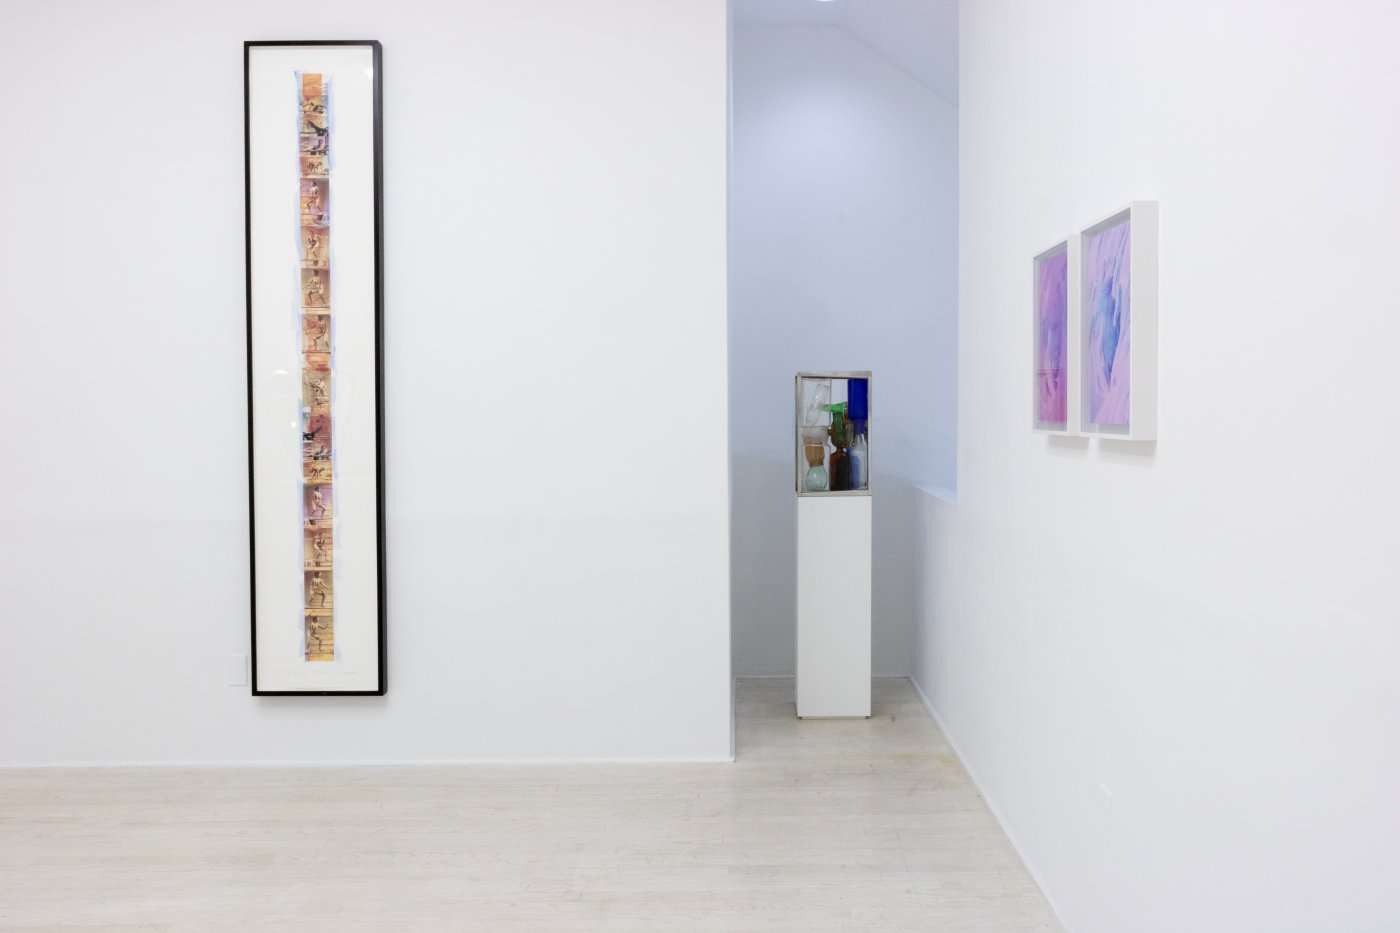 Installation image for Up To And Including Her Limits, at Halsey McKay Gallery